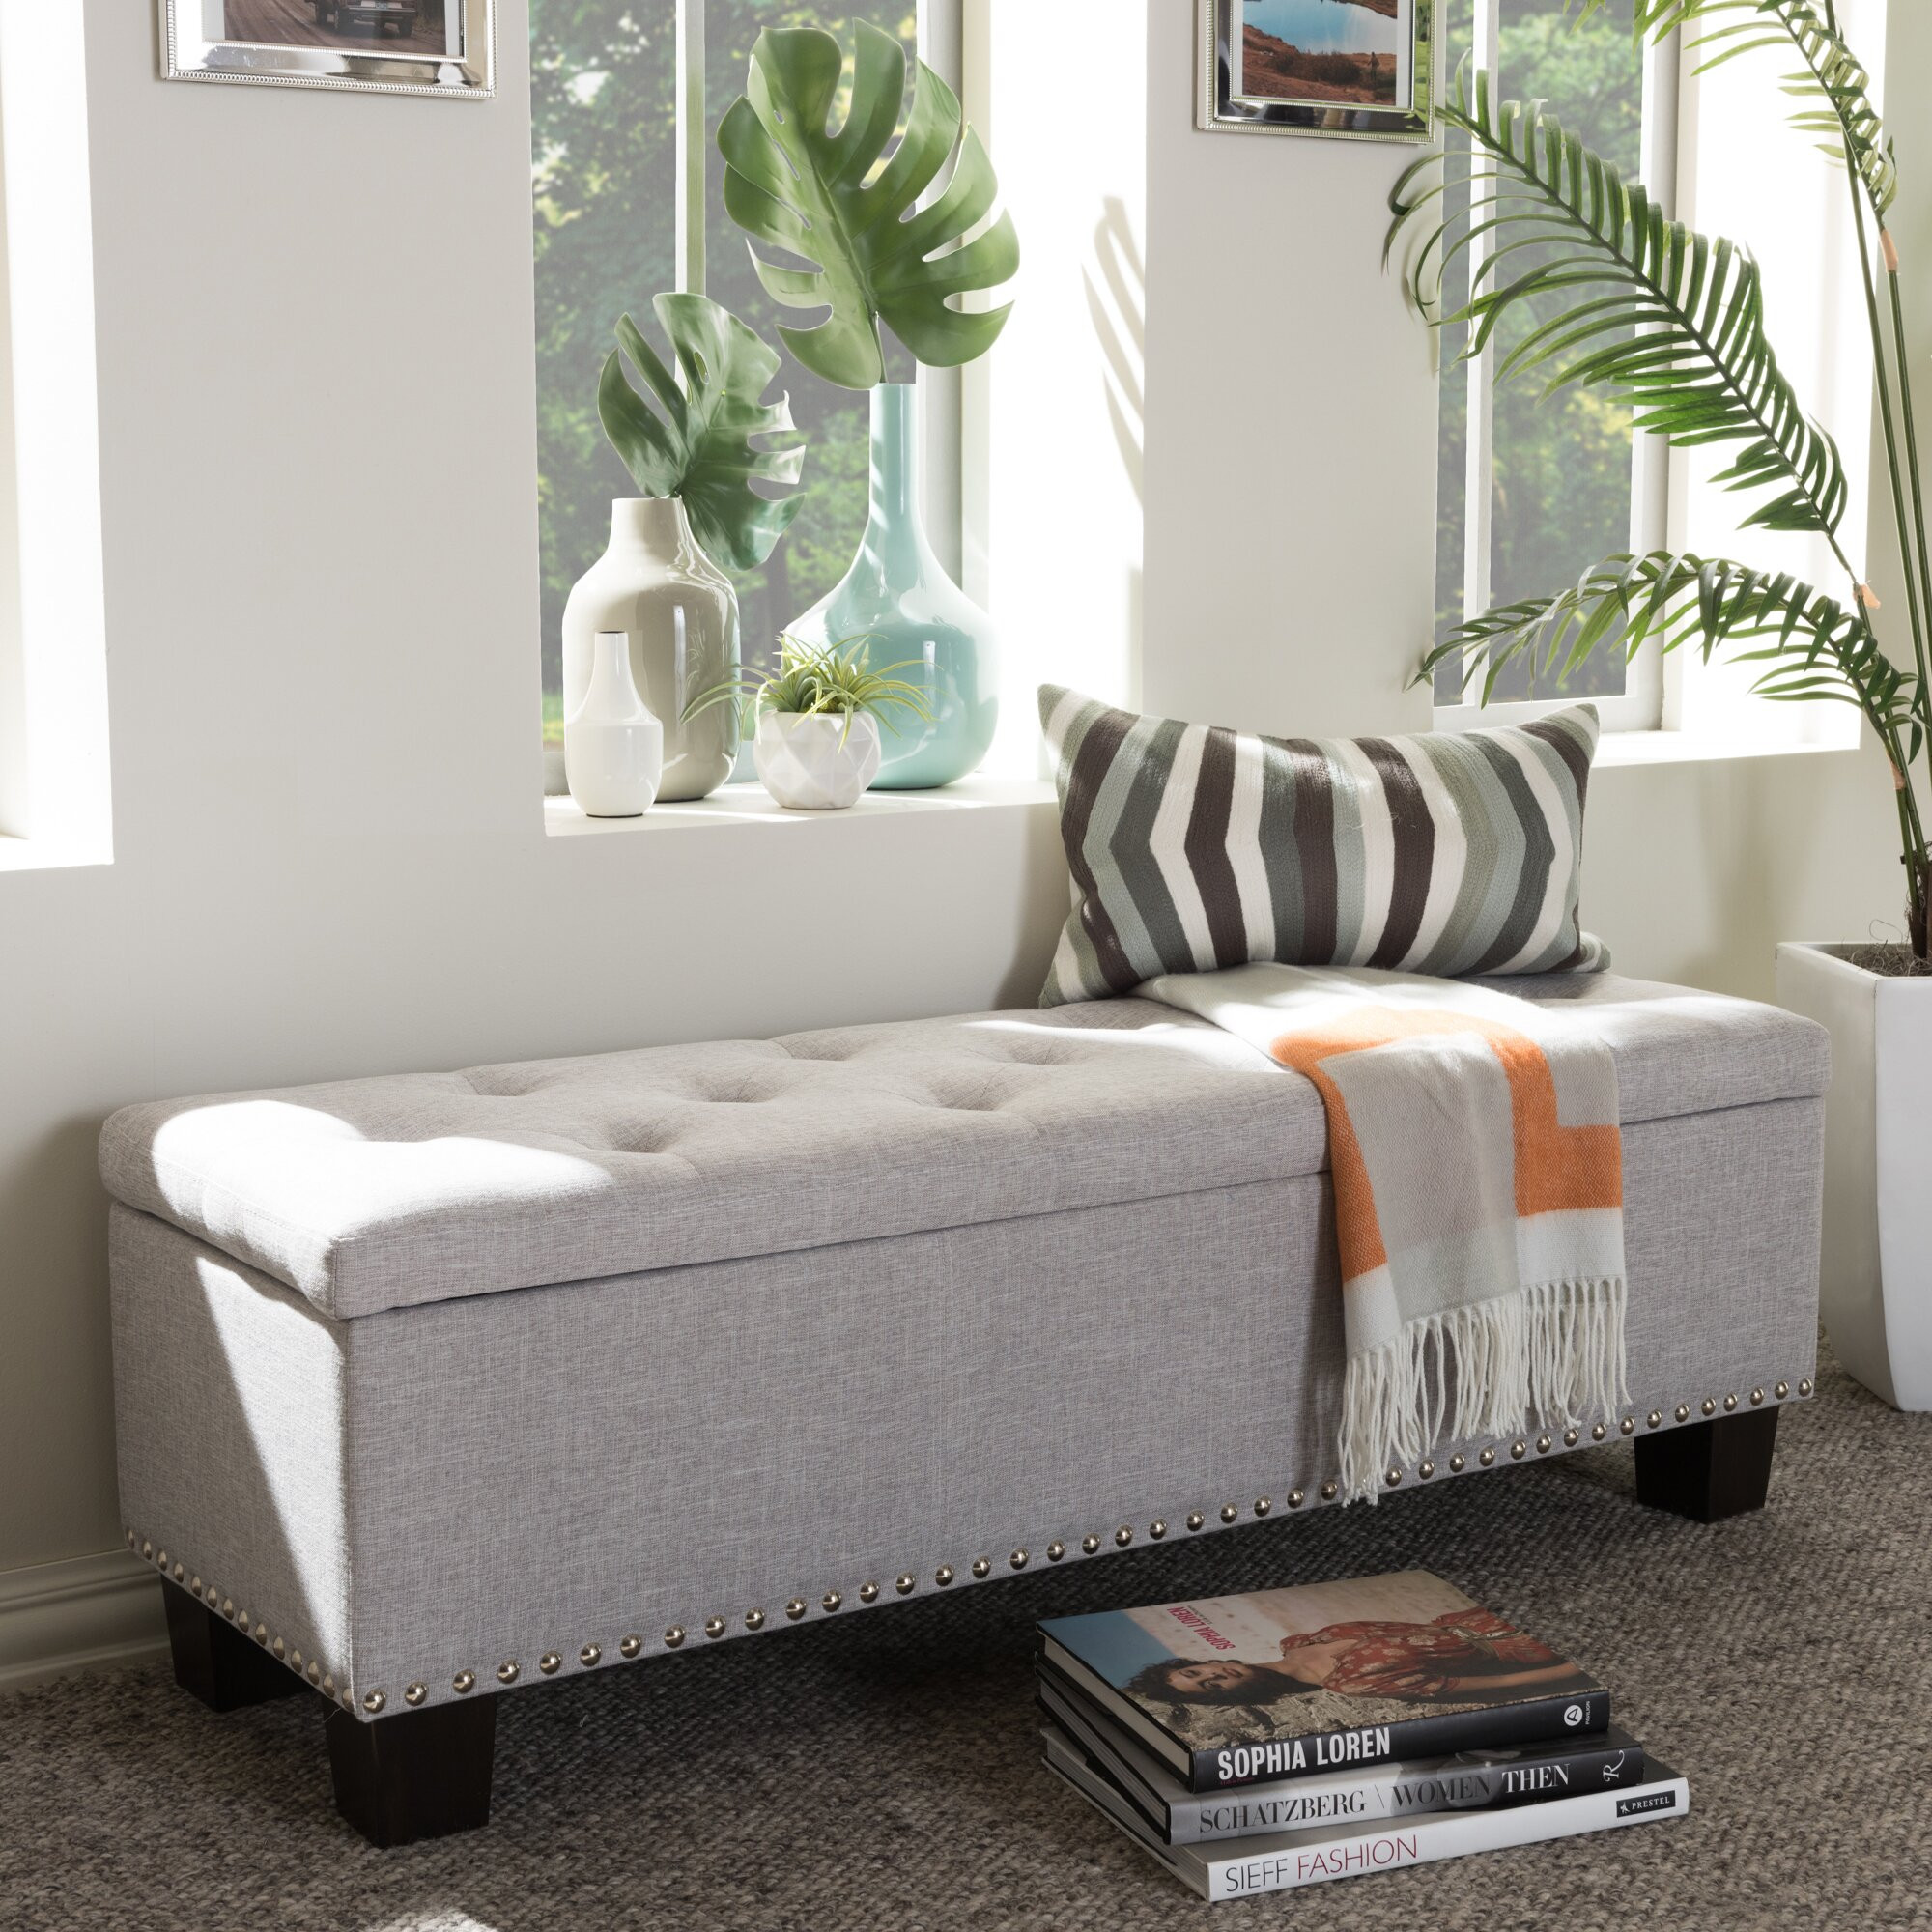 Transform Your Bedroom With A Versatile Storage Bench